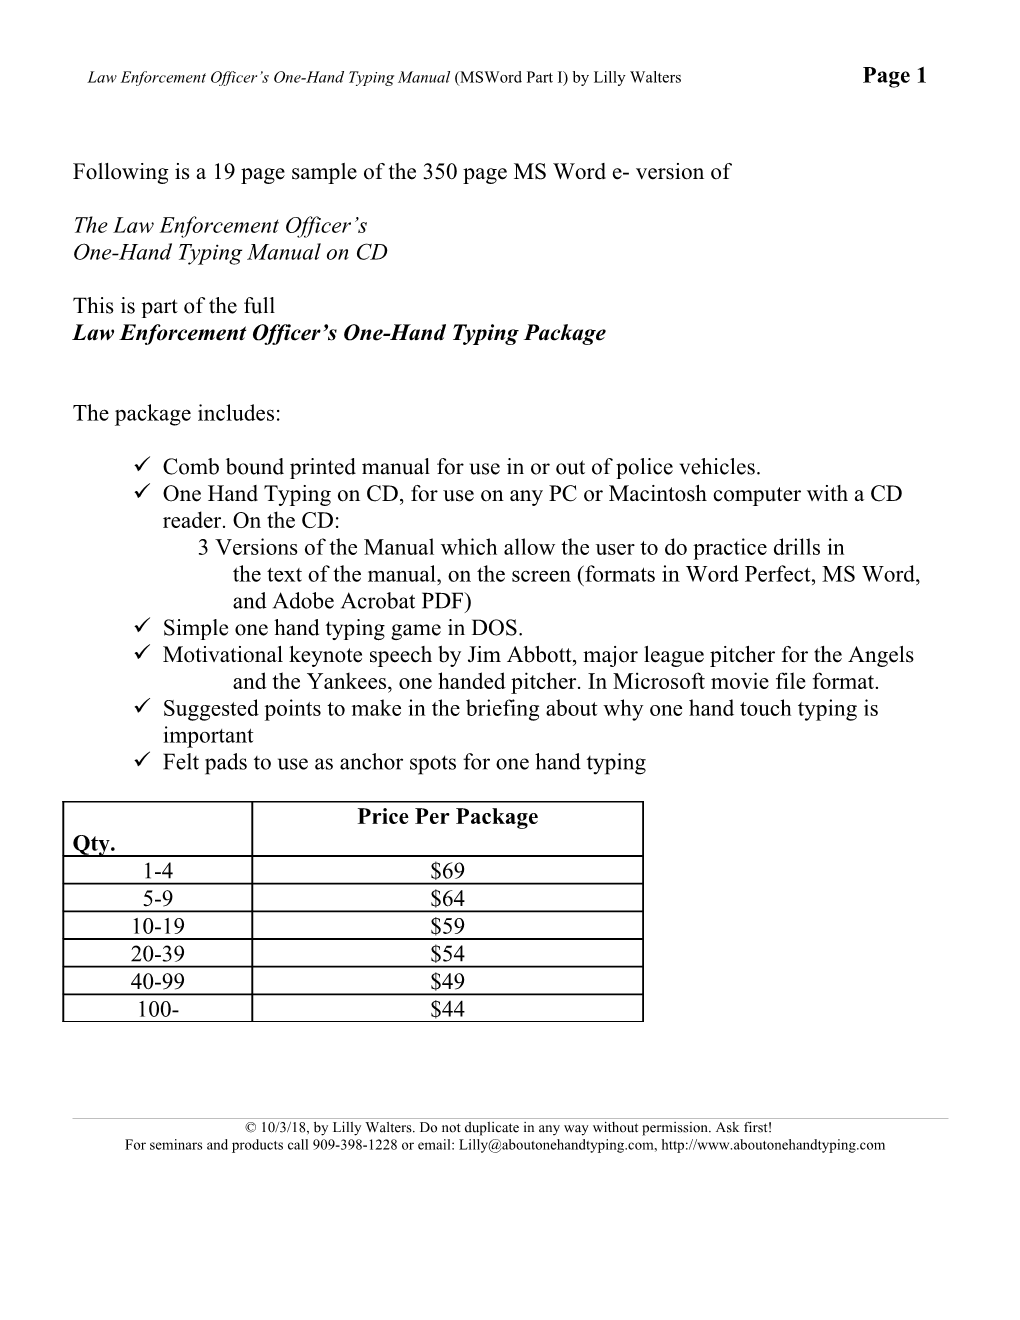 Following Is a 19 Page Sample of the 350 Page MS Word E- Version Of